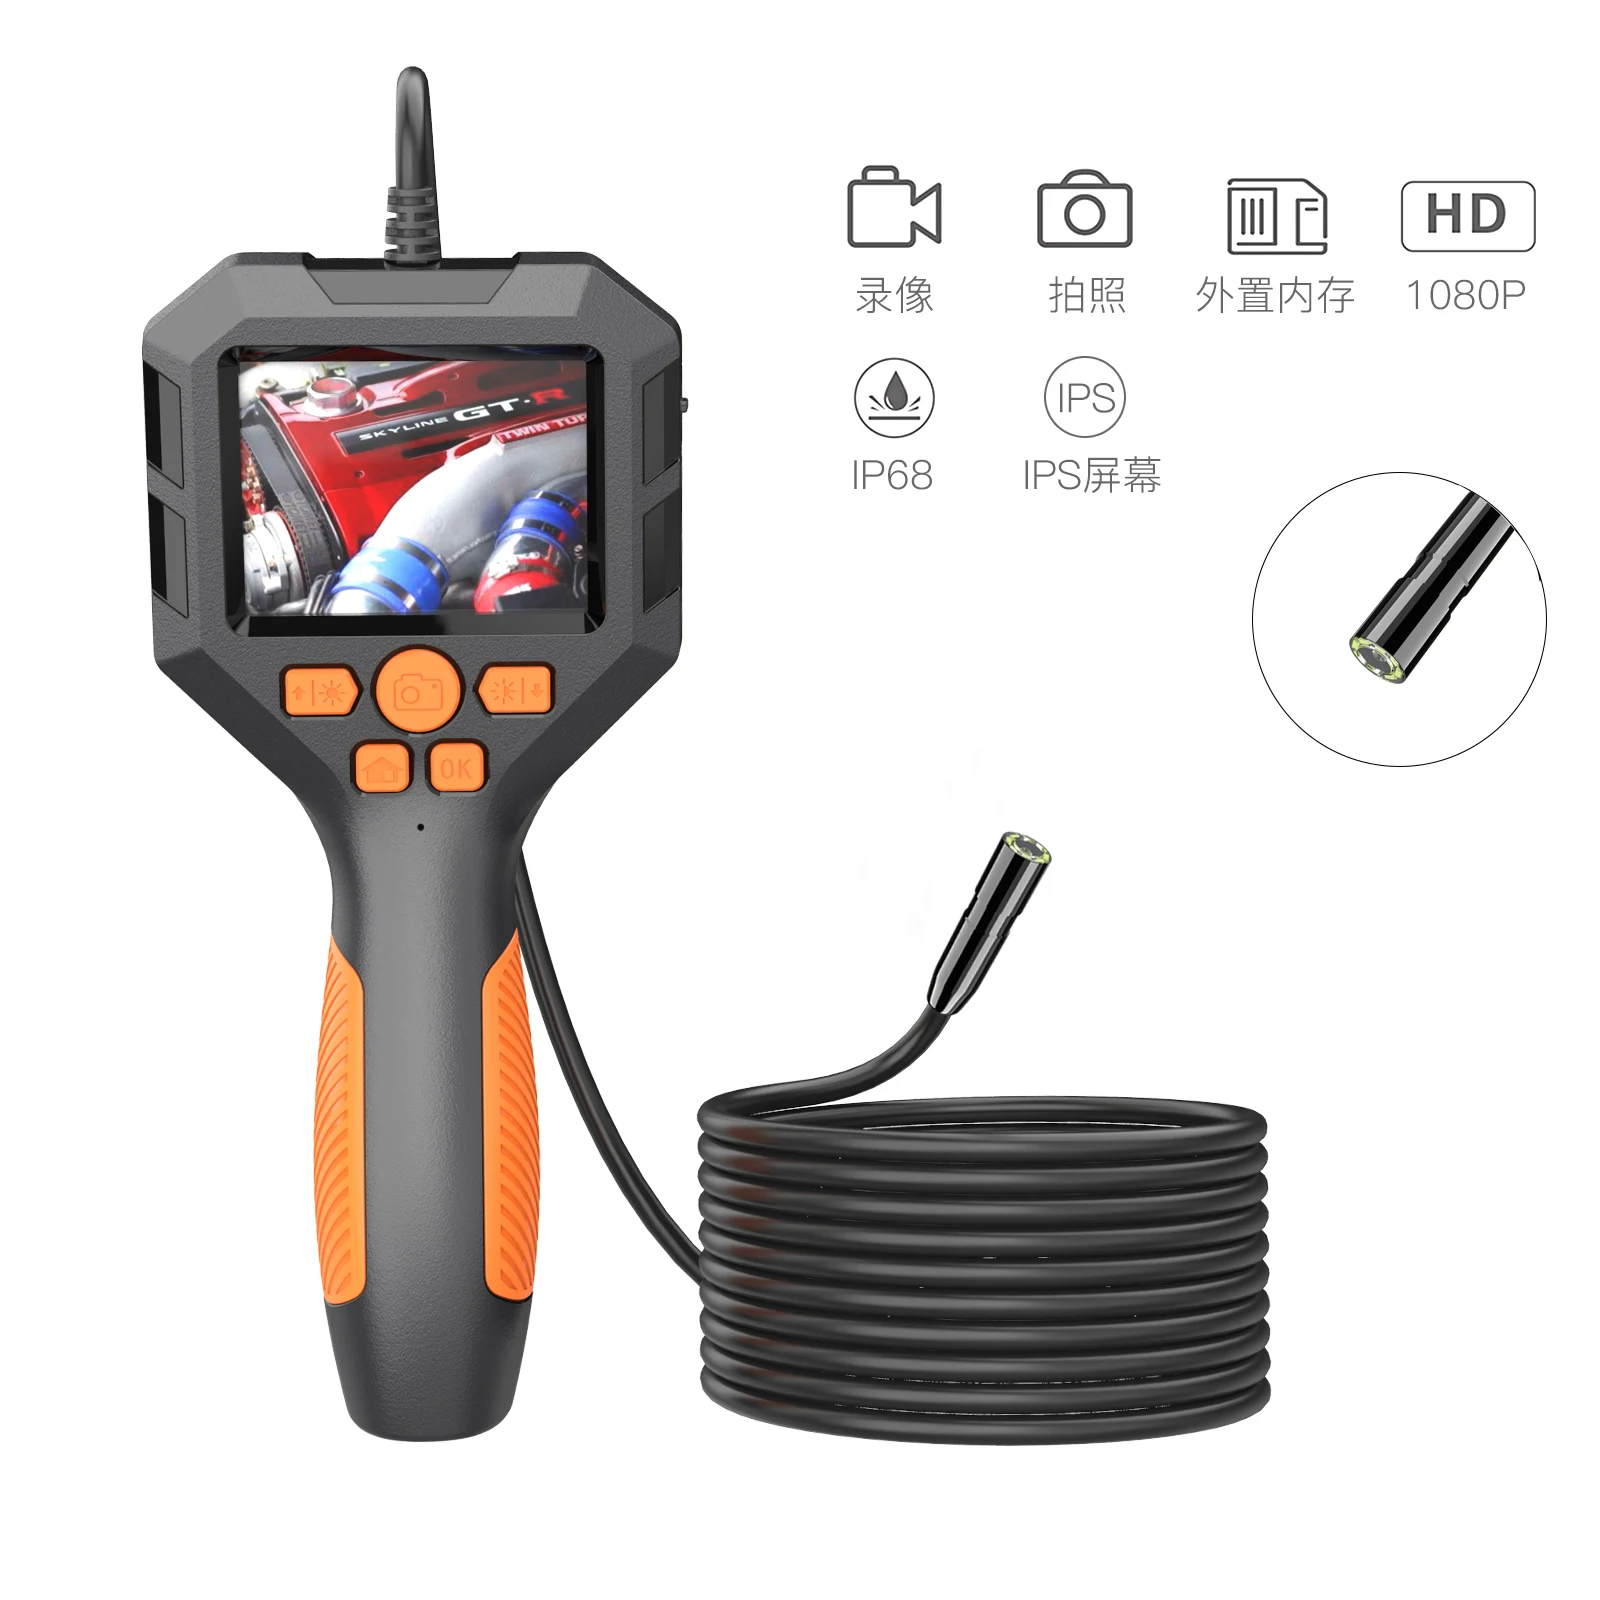 HD car maintenance engine cylinder carbon deposition industrial sewer pipe visual probe detector